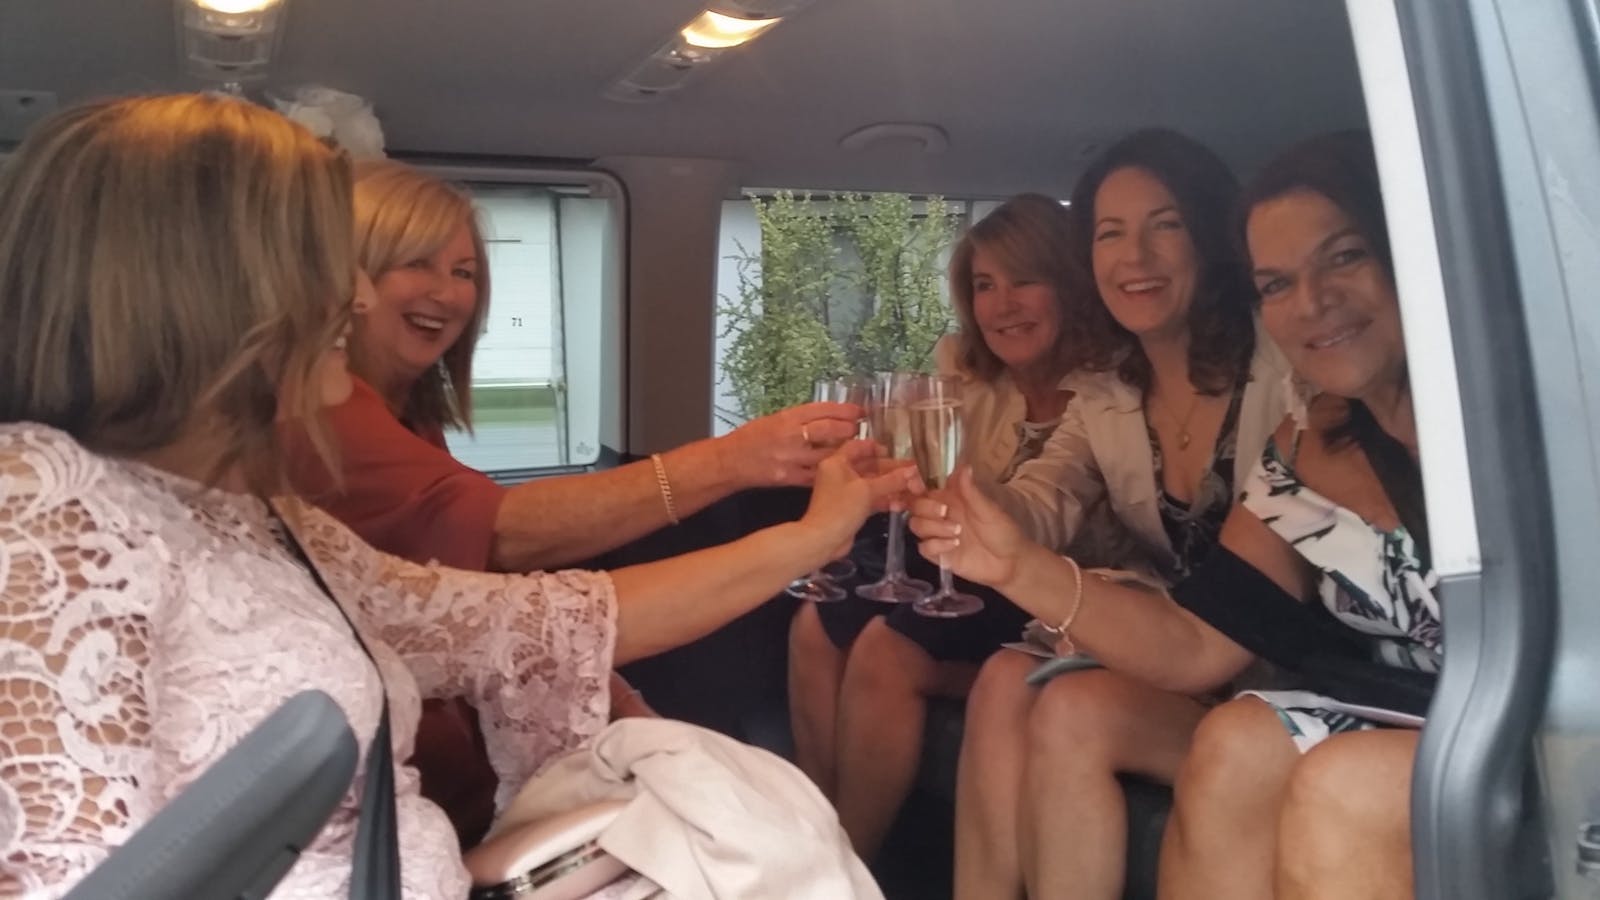 A comfortable means of travel with complimentary champagne